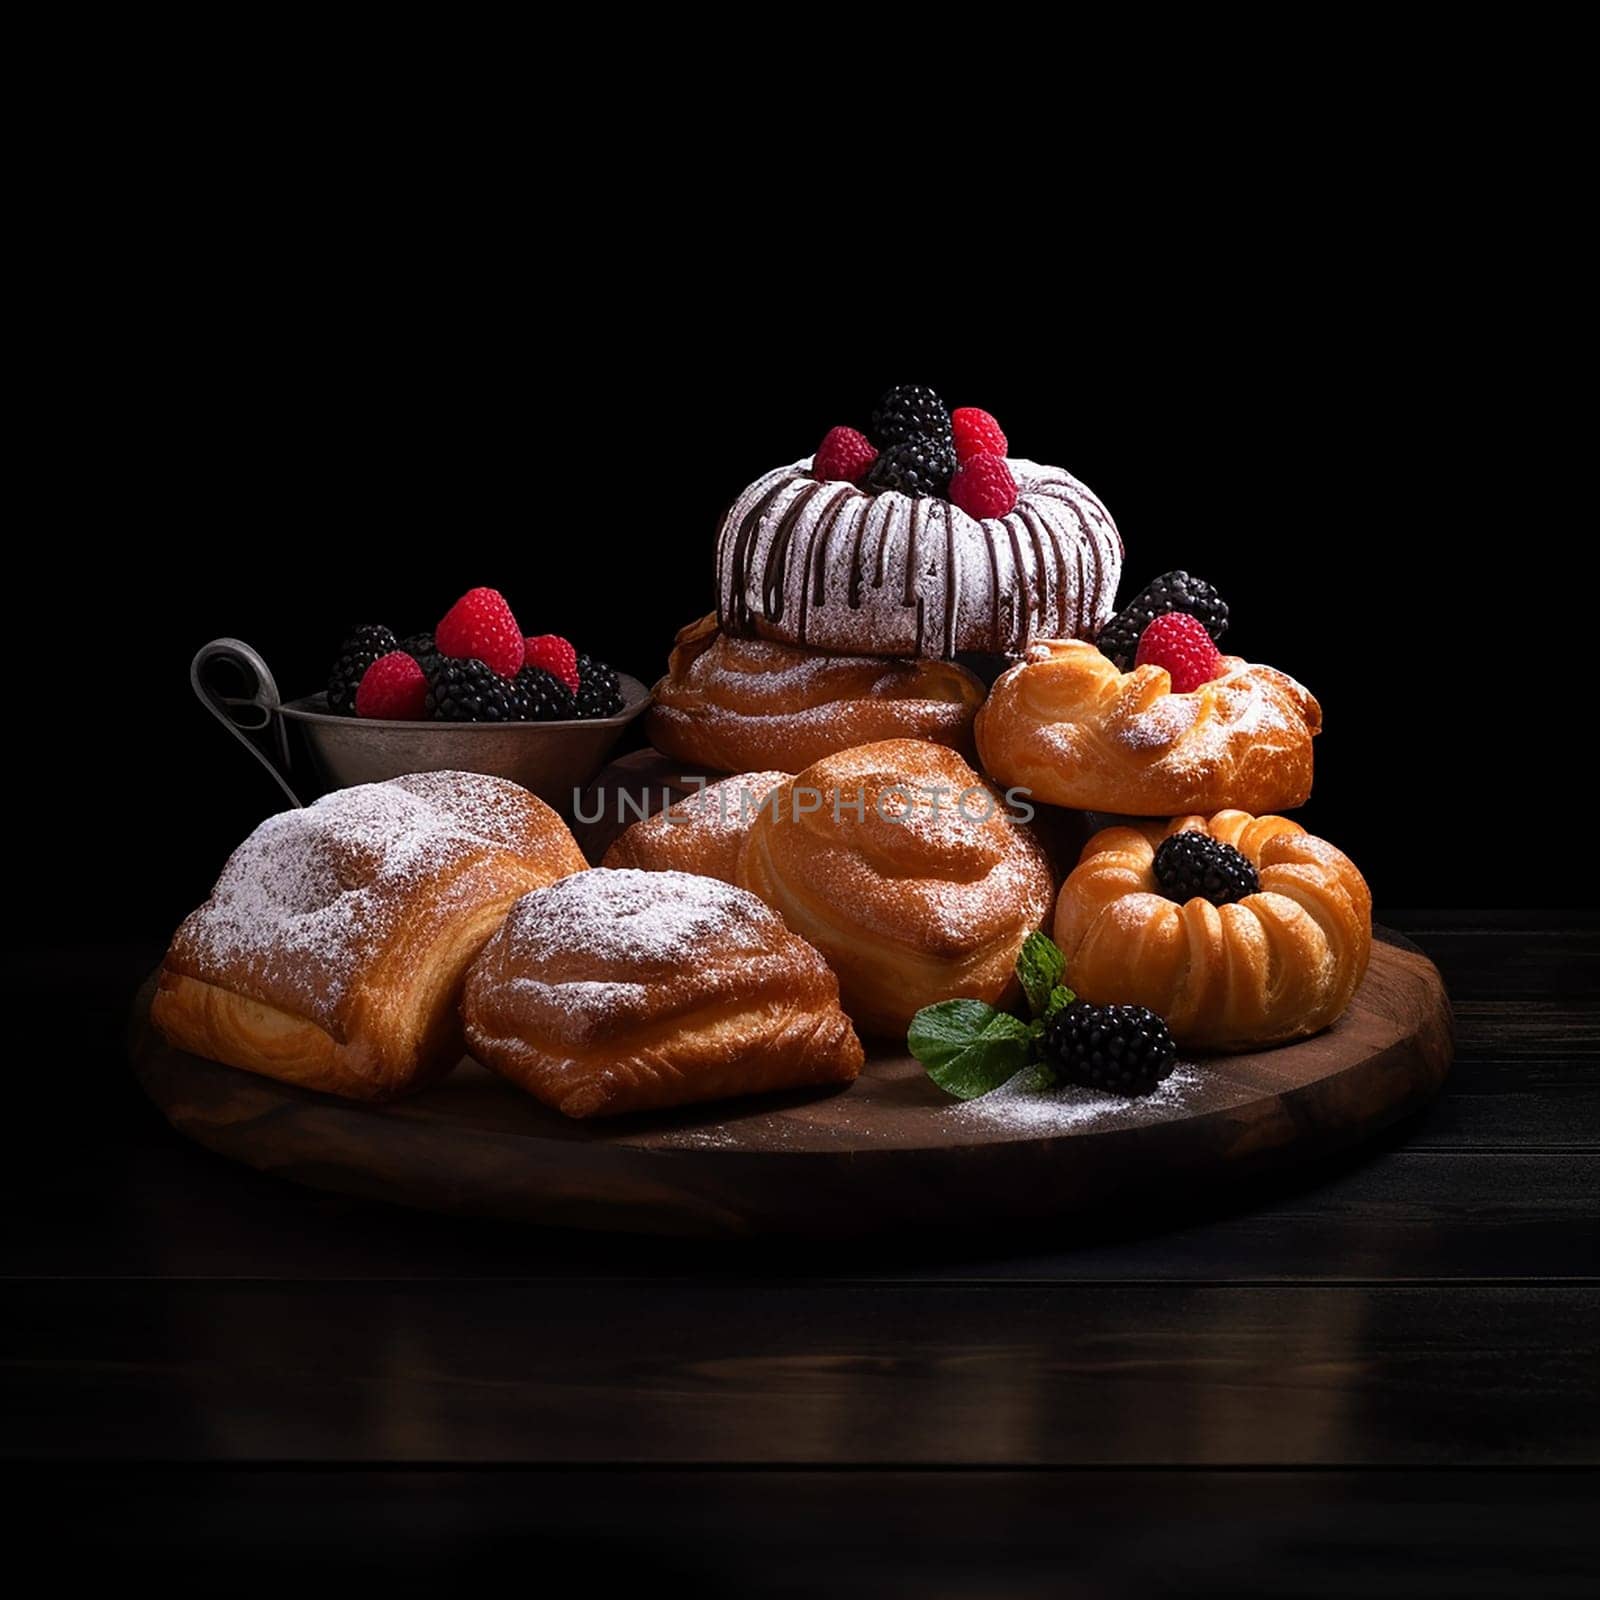 Assortment of baked goods with berries on a dark background by Hype2art